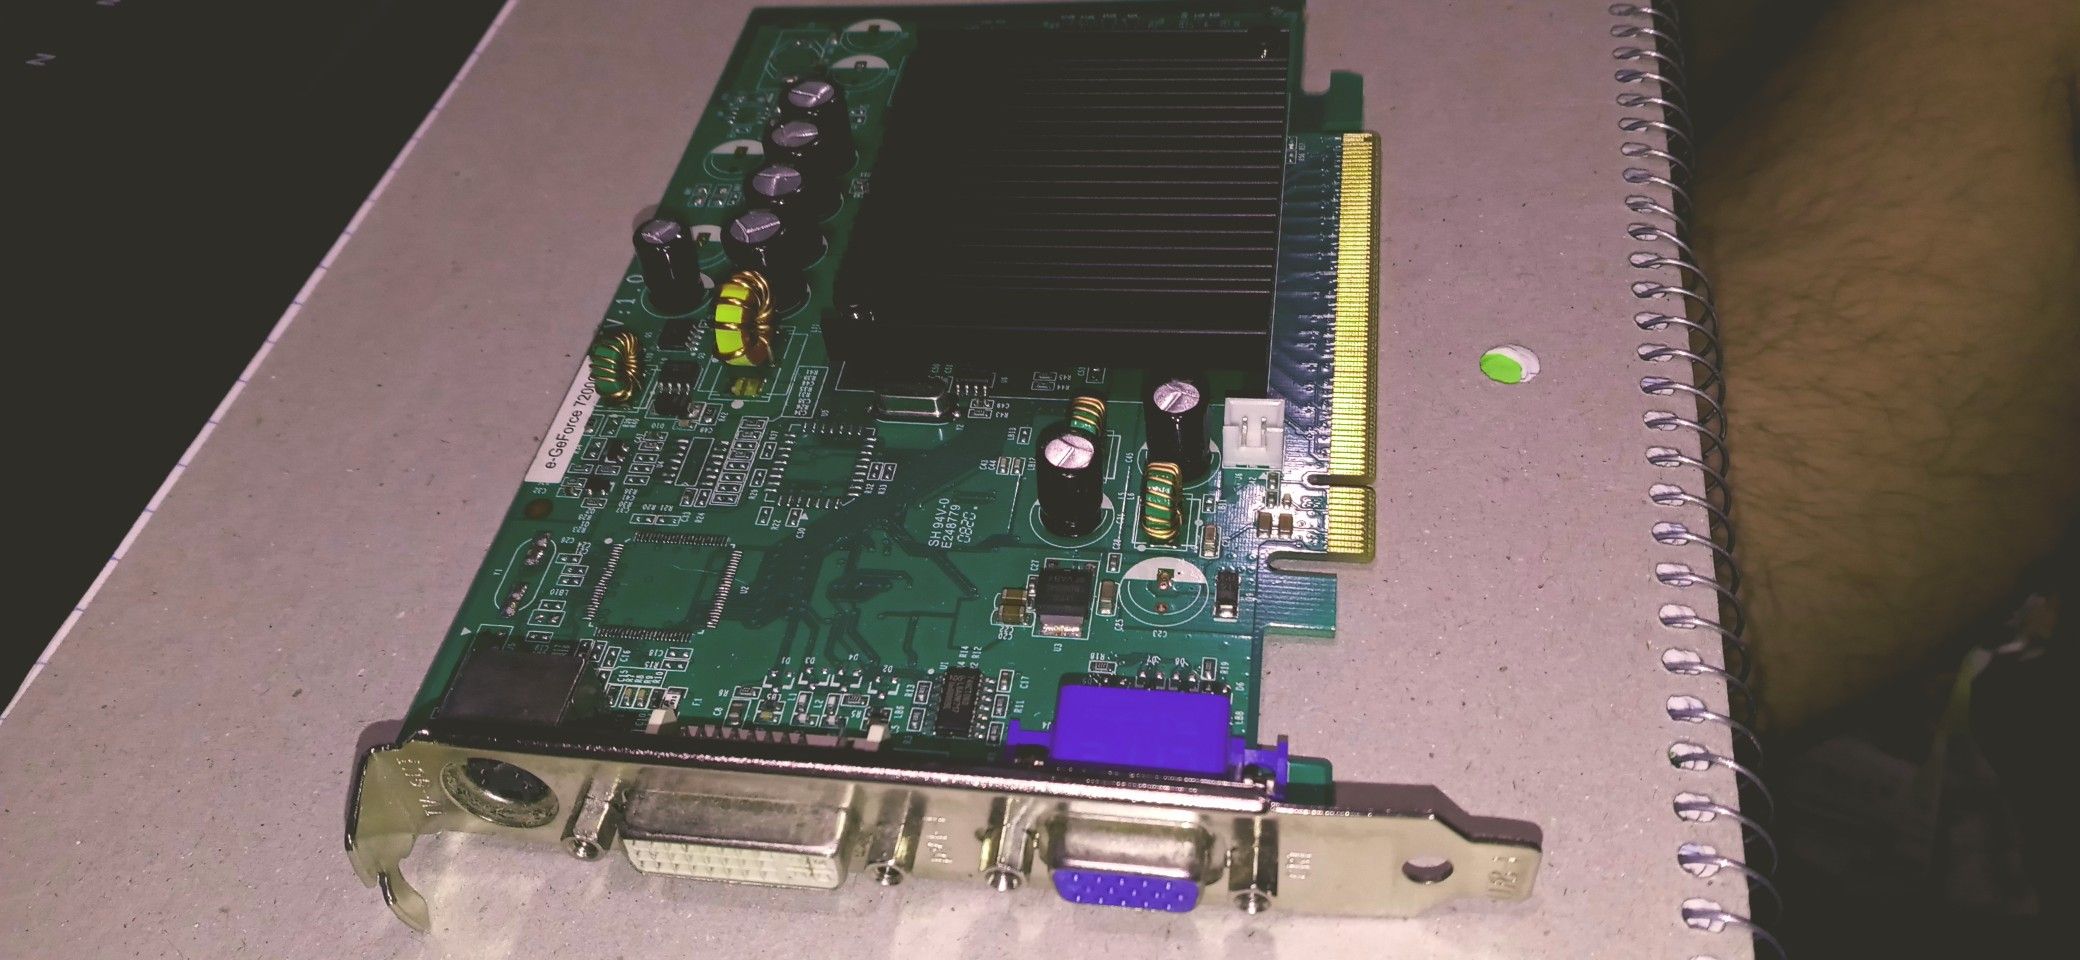 EG Force 7200gs video card 7200 GS 256 MB ddr2